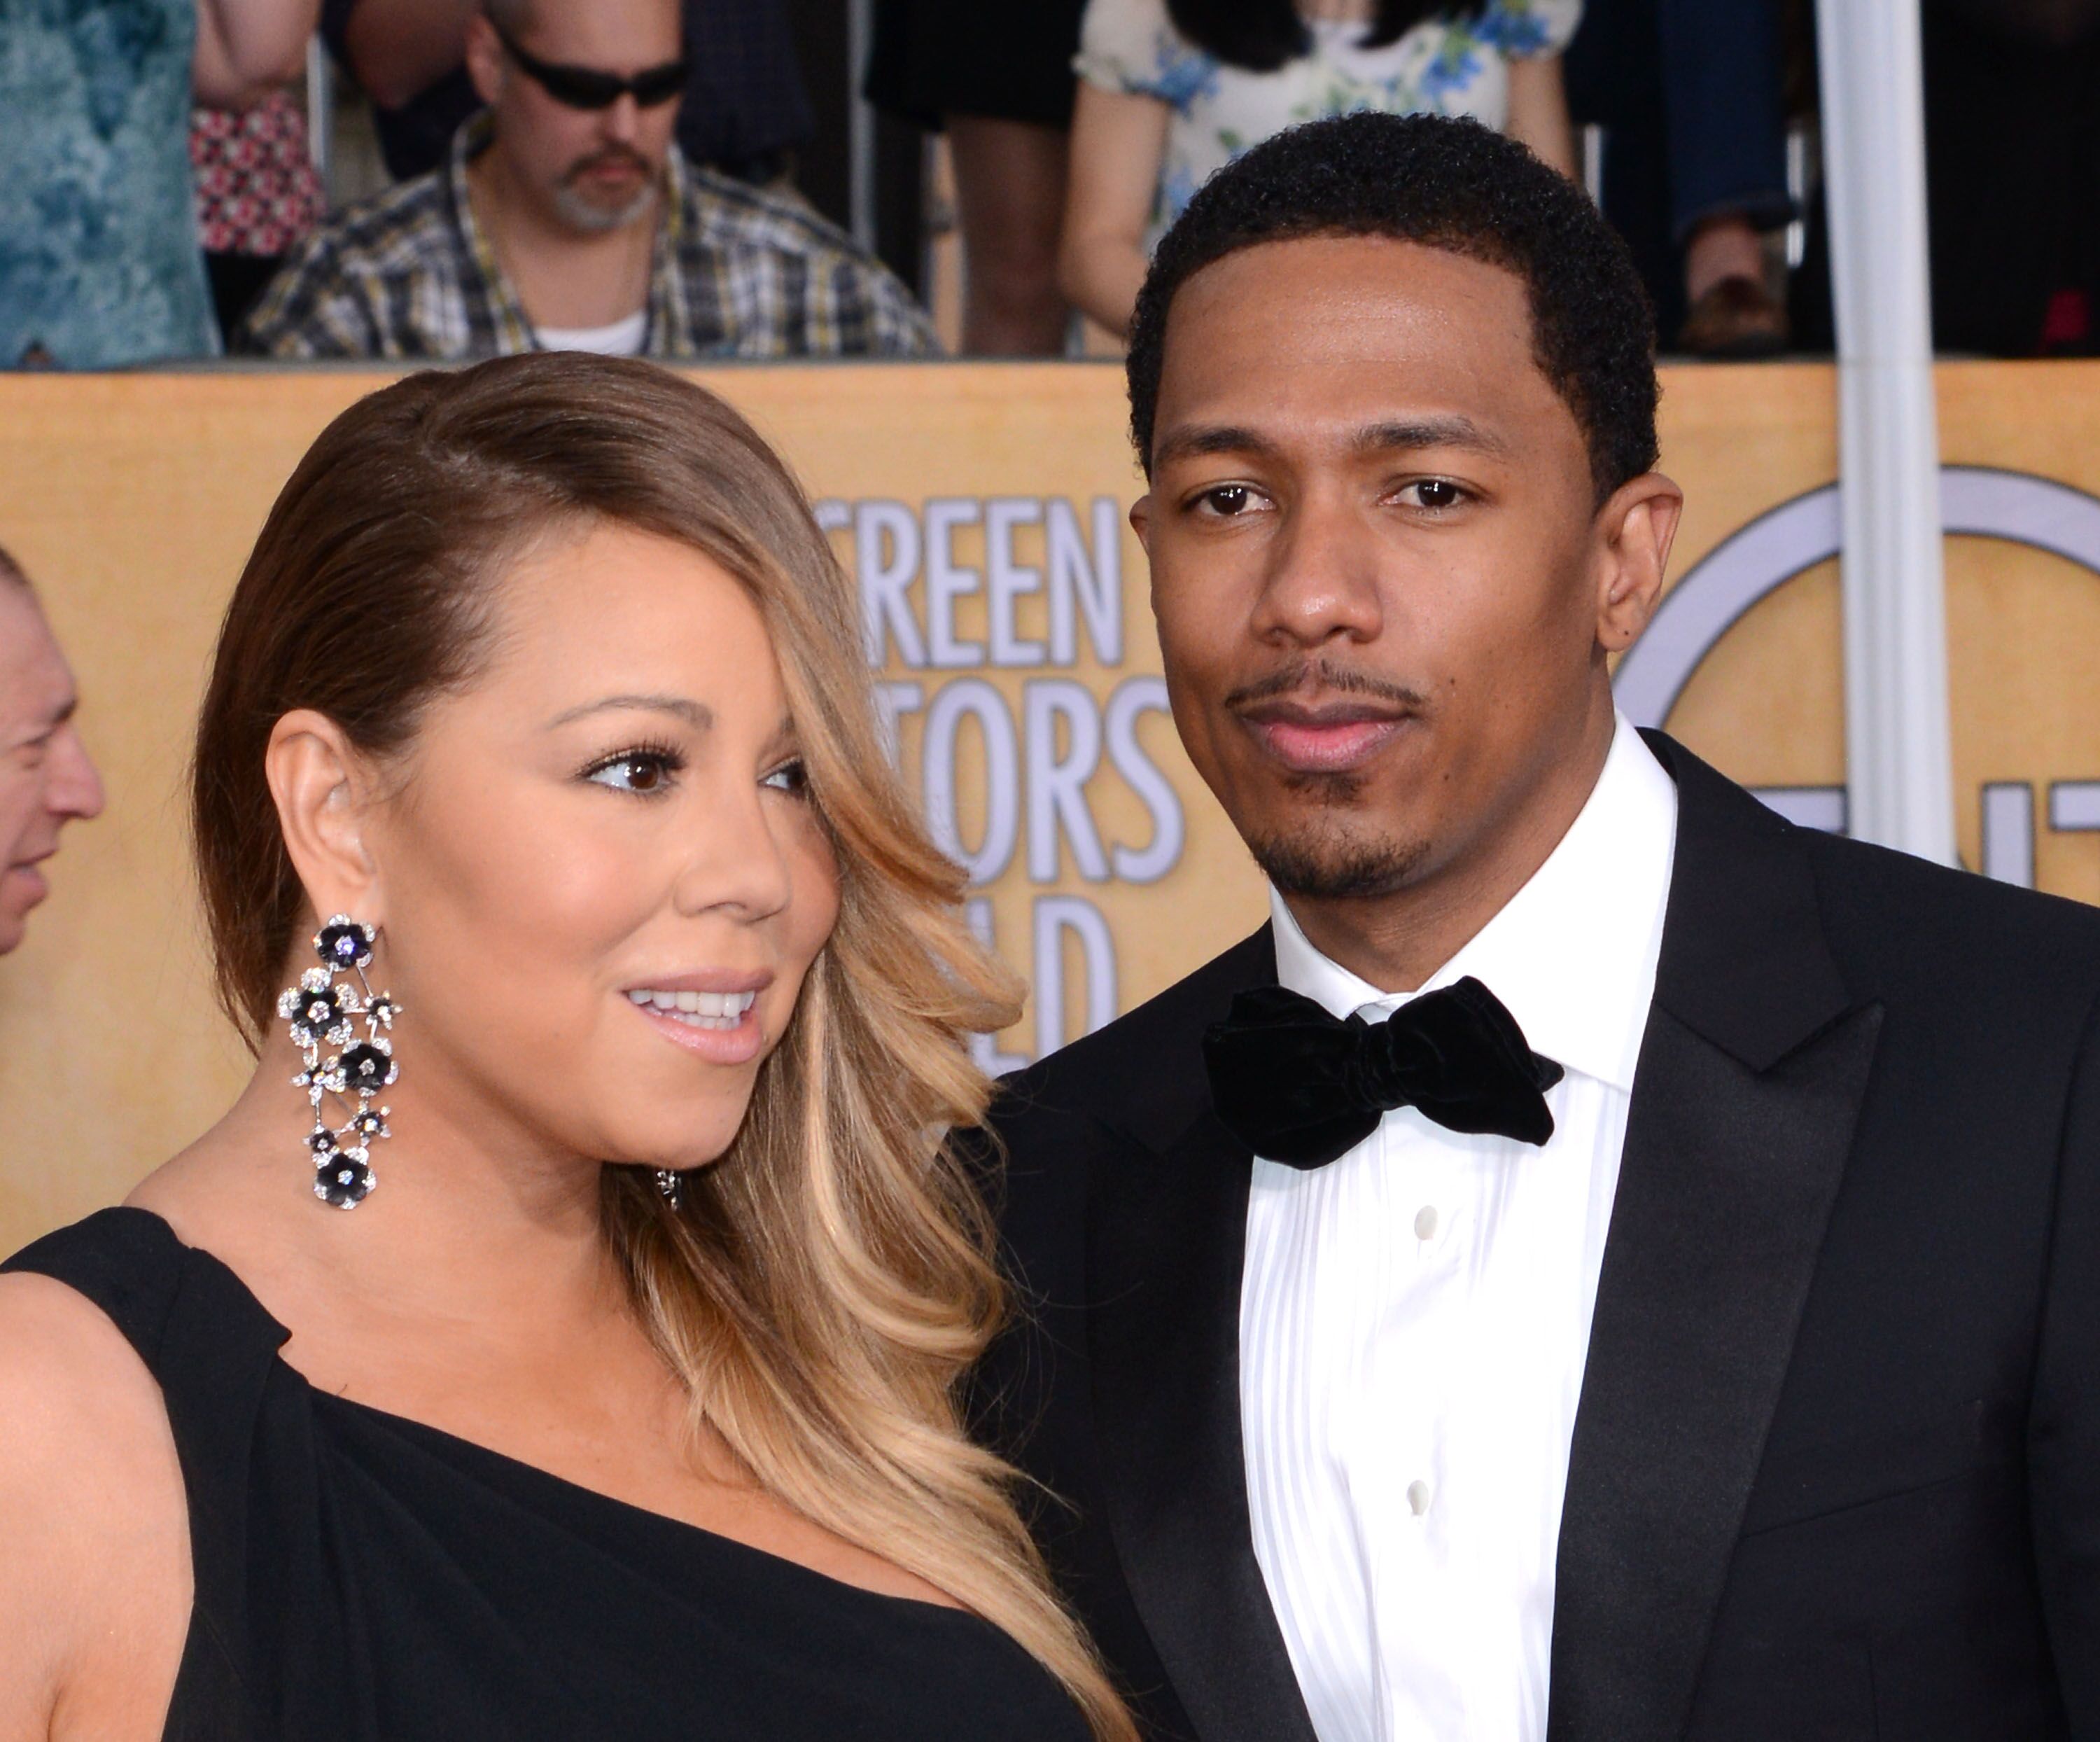 Mariah Carey and Nick Cannon at the Screen Actors' Guild Awards | Source: Getty Images/GlobalImagesUkraine